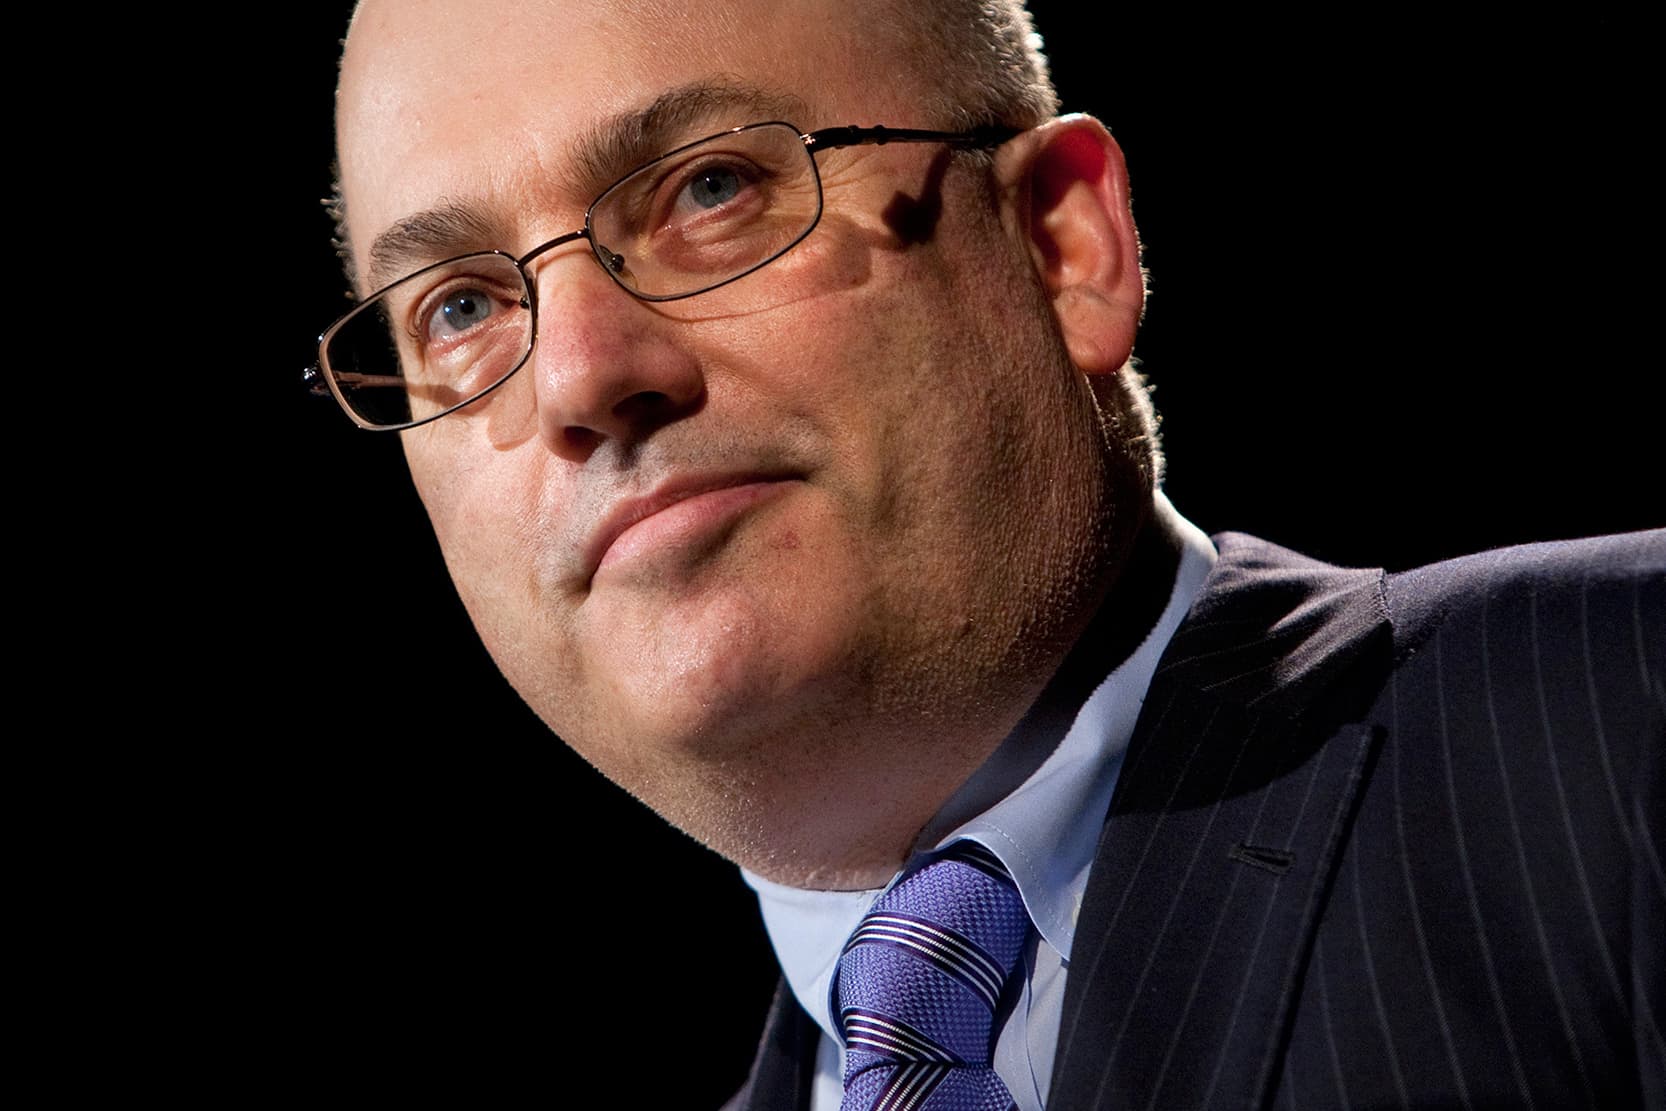 Level72 founder Steve Cohen leaves Twitter after household receives threats